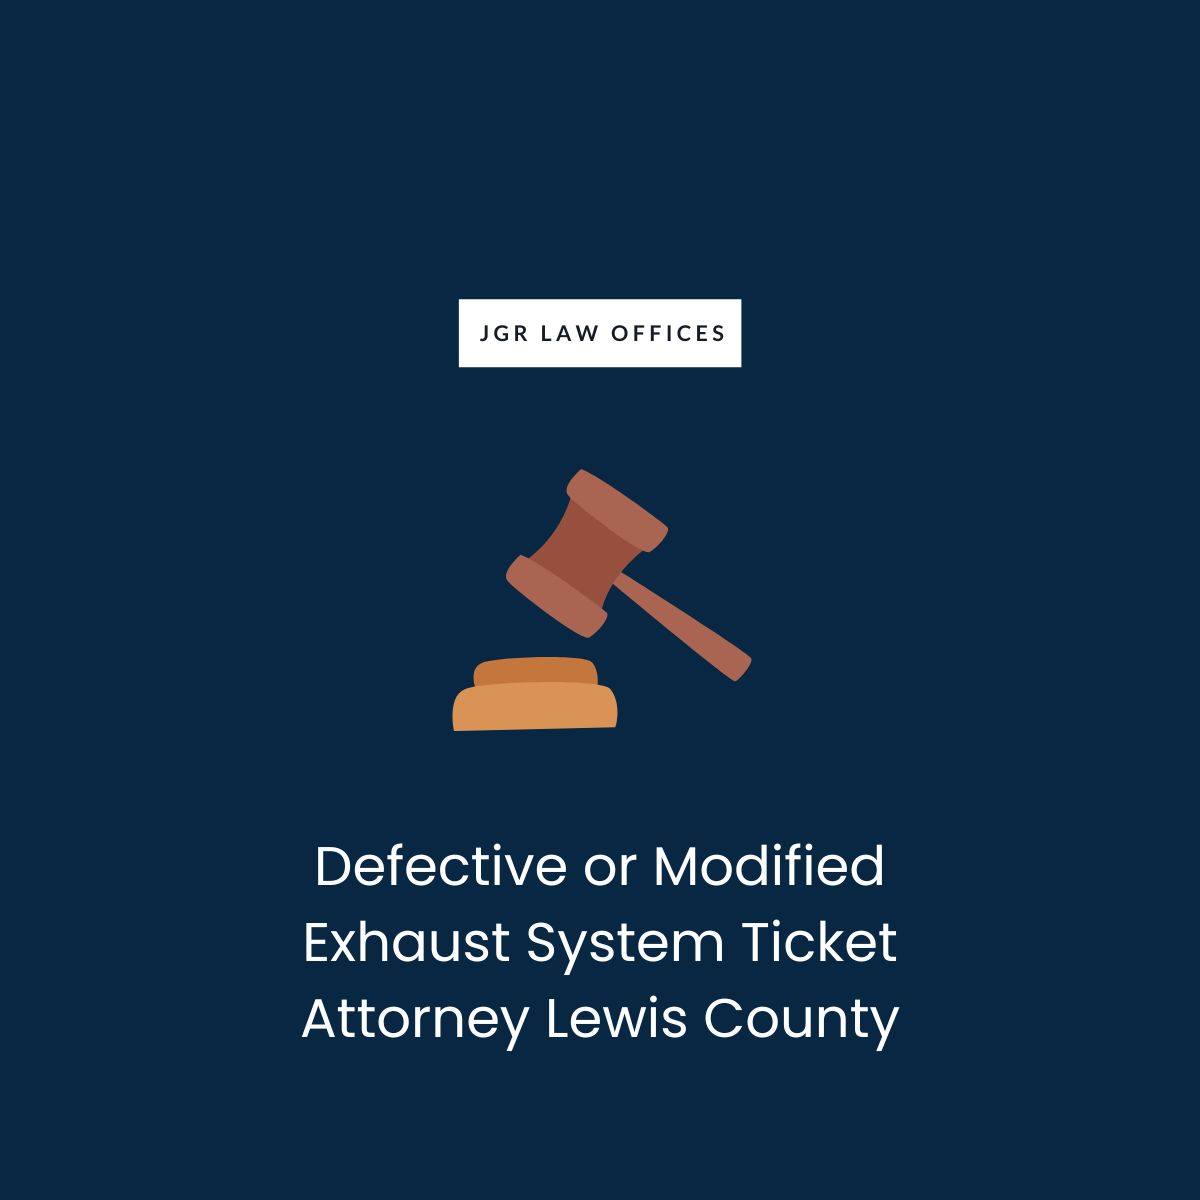 Defective or Modified Exhaust System Ticket Attorney Lewis County